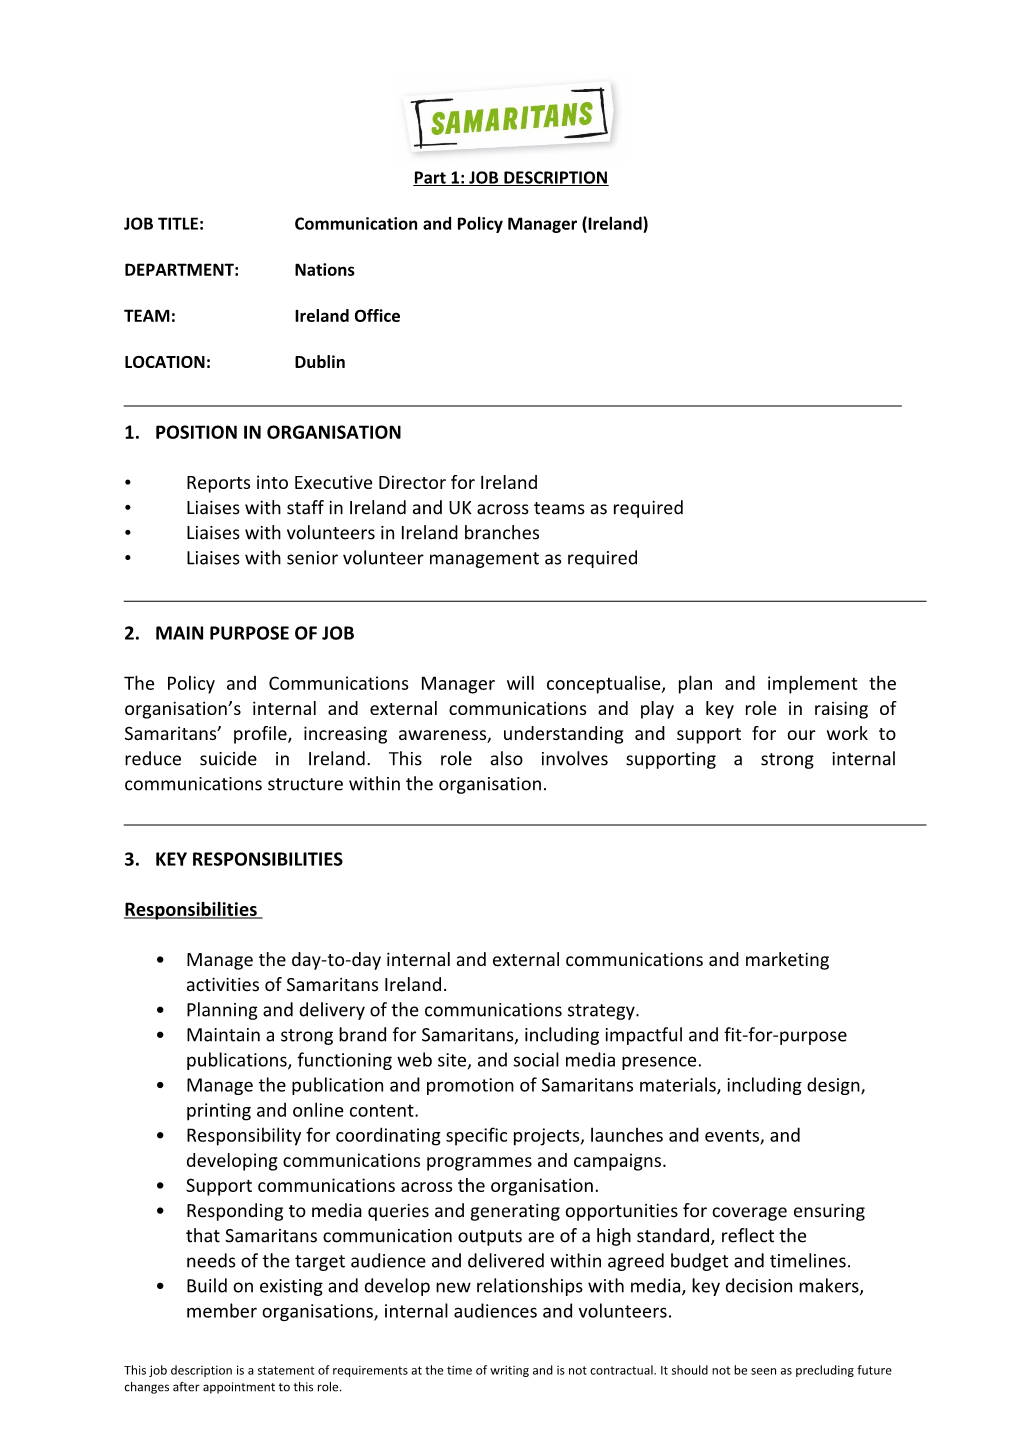 JOB TITLE: Communication and Policy Manager (Ireland)